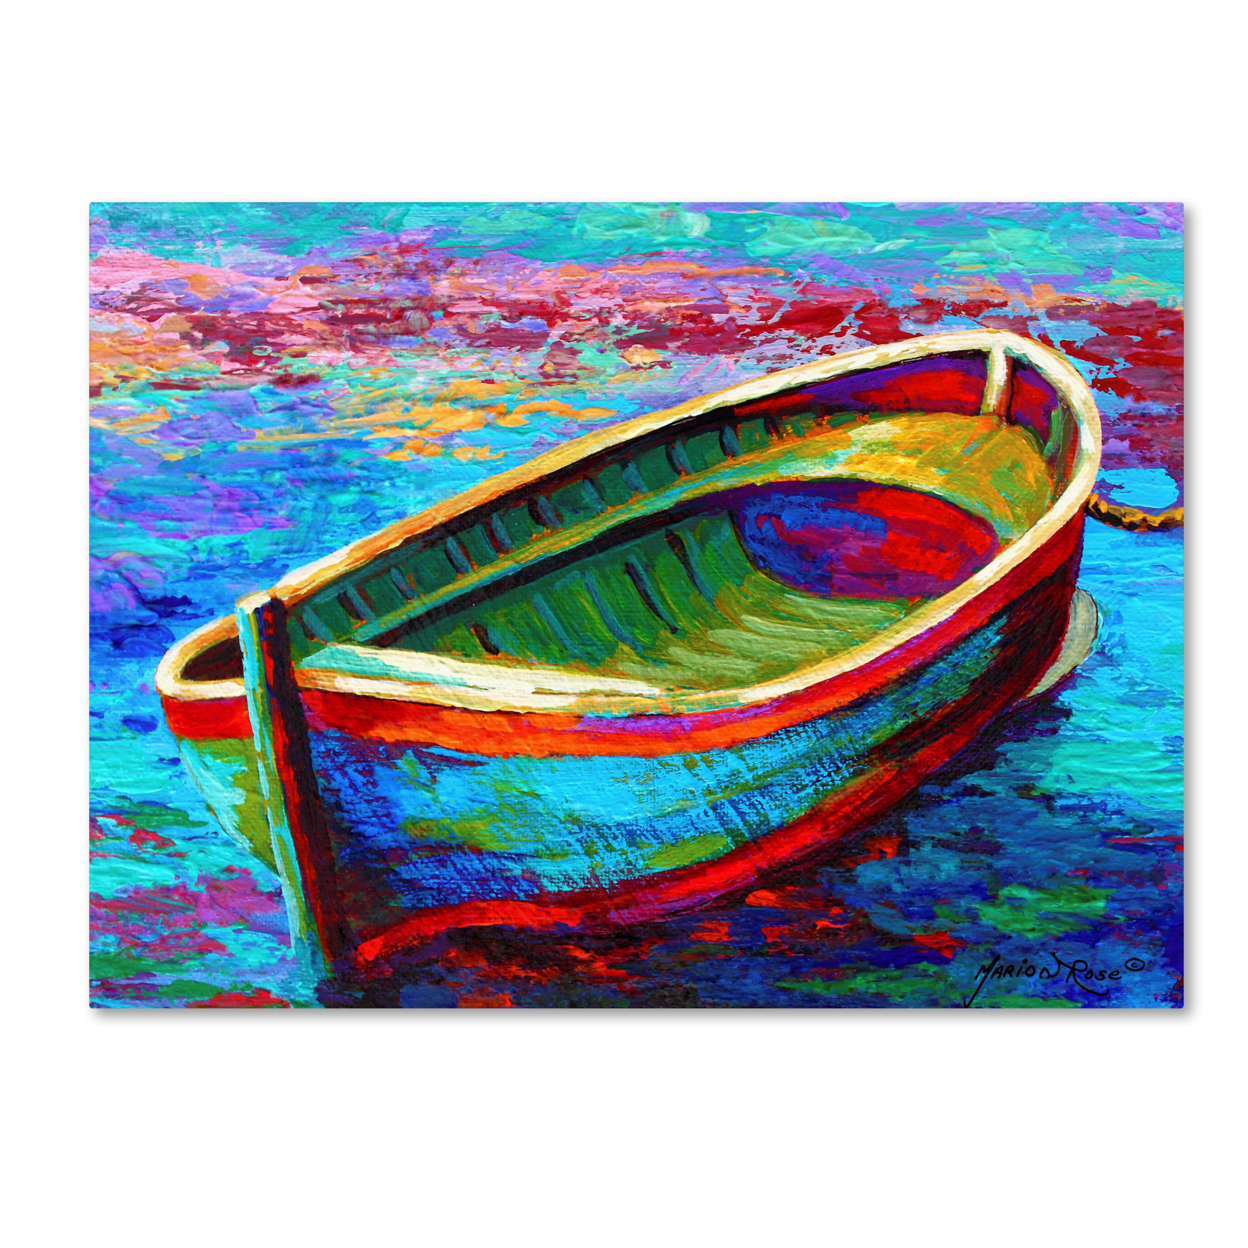 Marion Rose 'Boat 9' Ready To Hang Canvas Art 18 X 24 Inches Made In USA